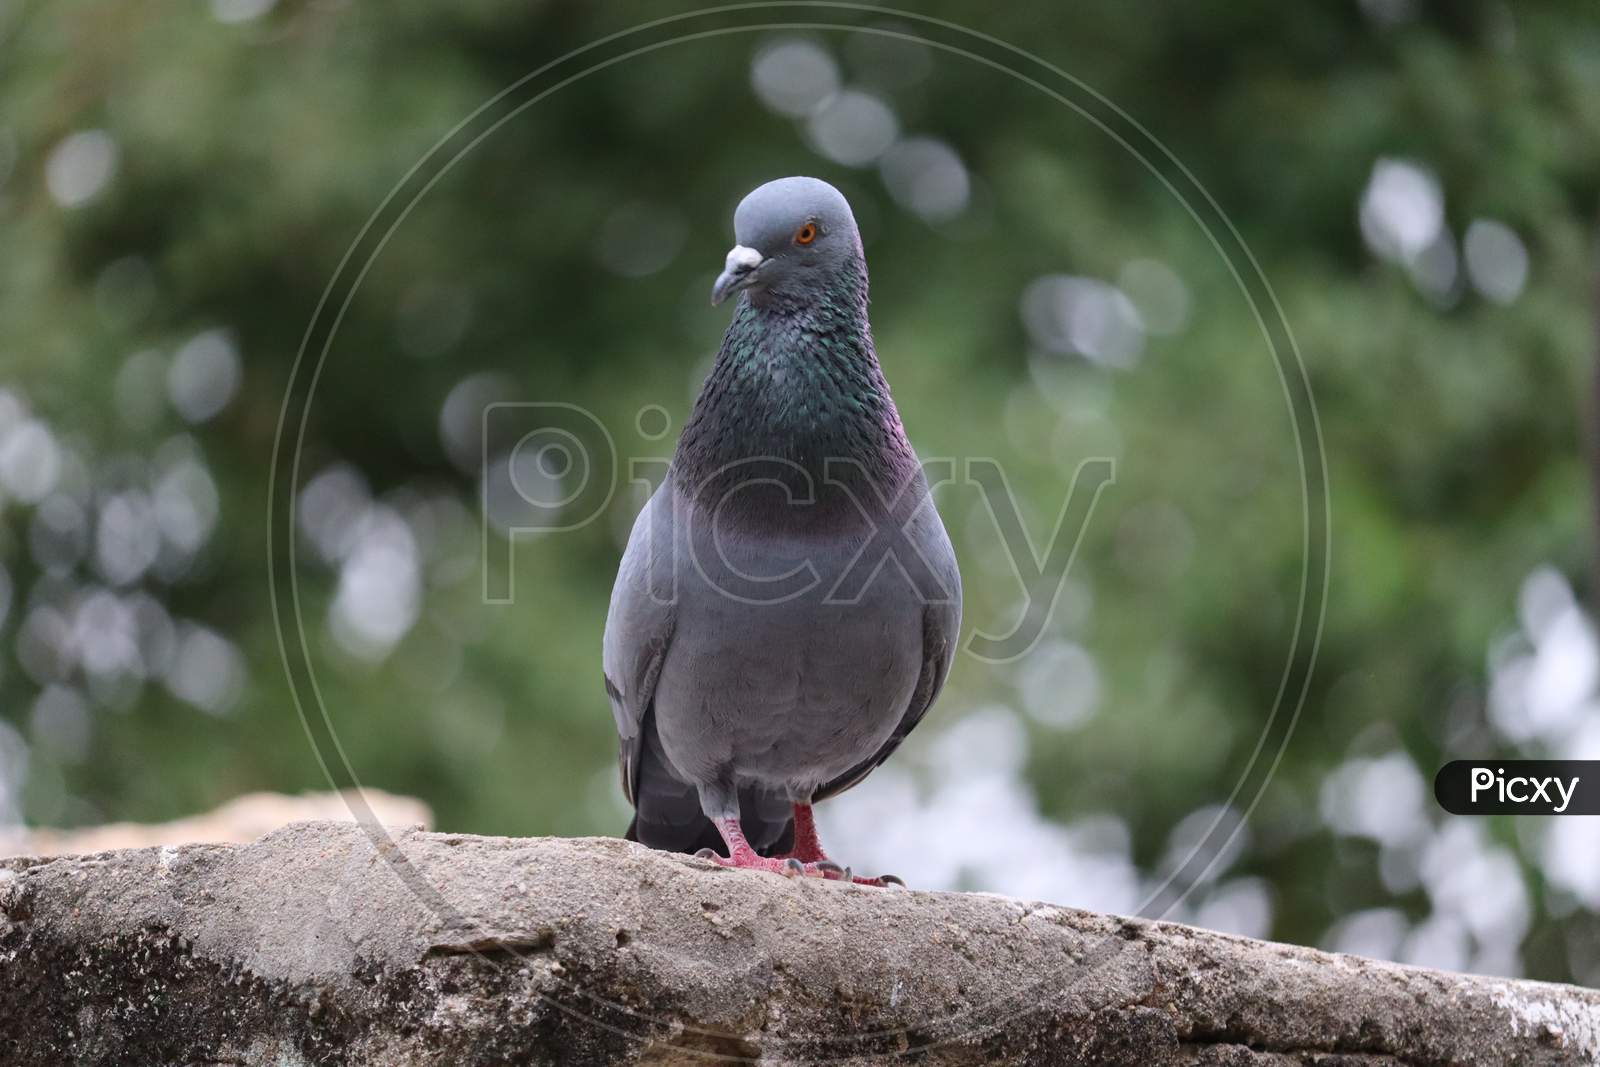 Front View Of The Face Of Rock Pigeon Face To Face.Rock Pigeons Crowd Streets And Public Squares, Living On Discarded Food And Offerings Of Birdseed.